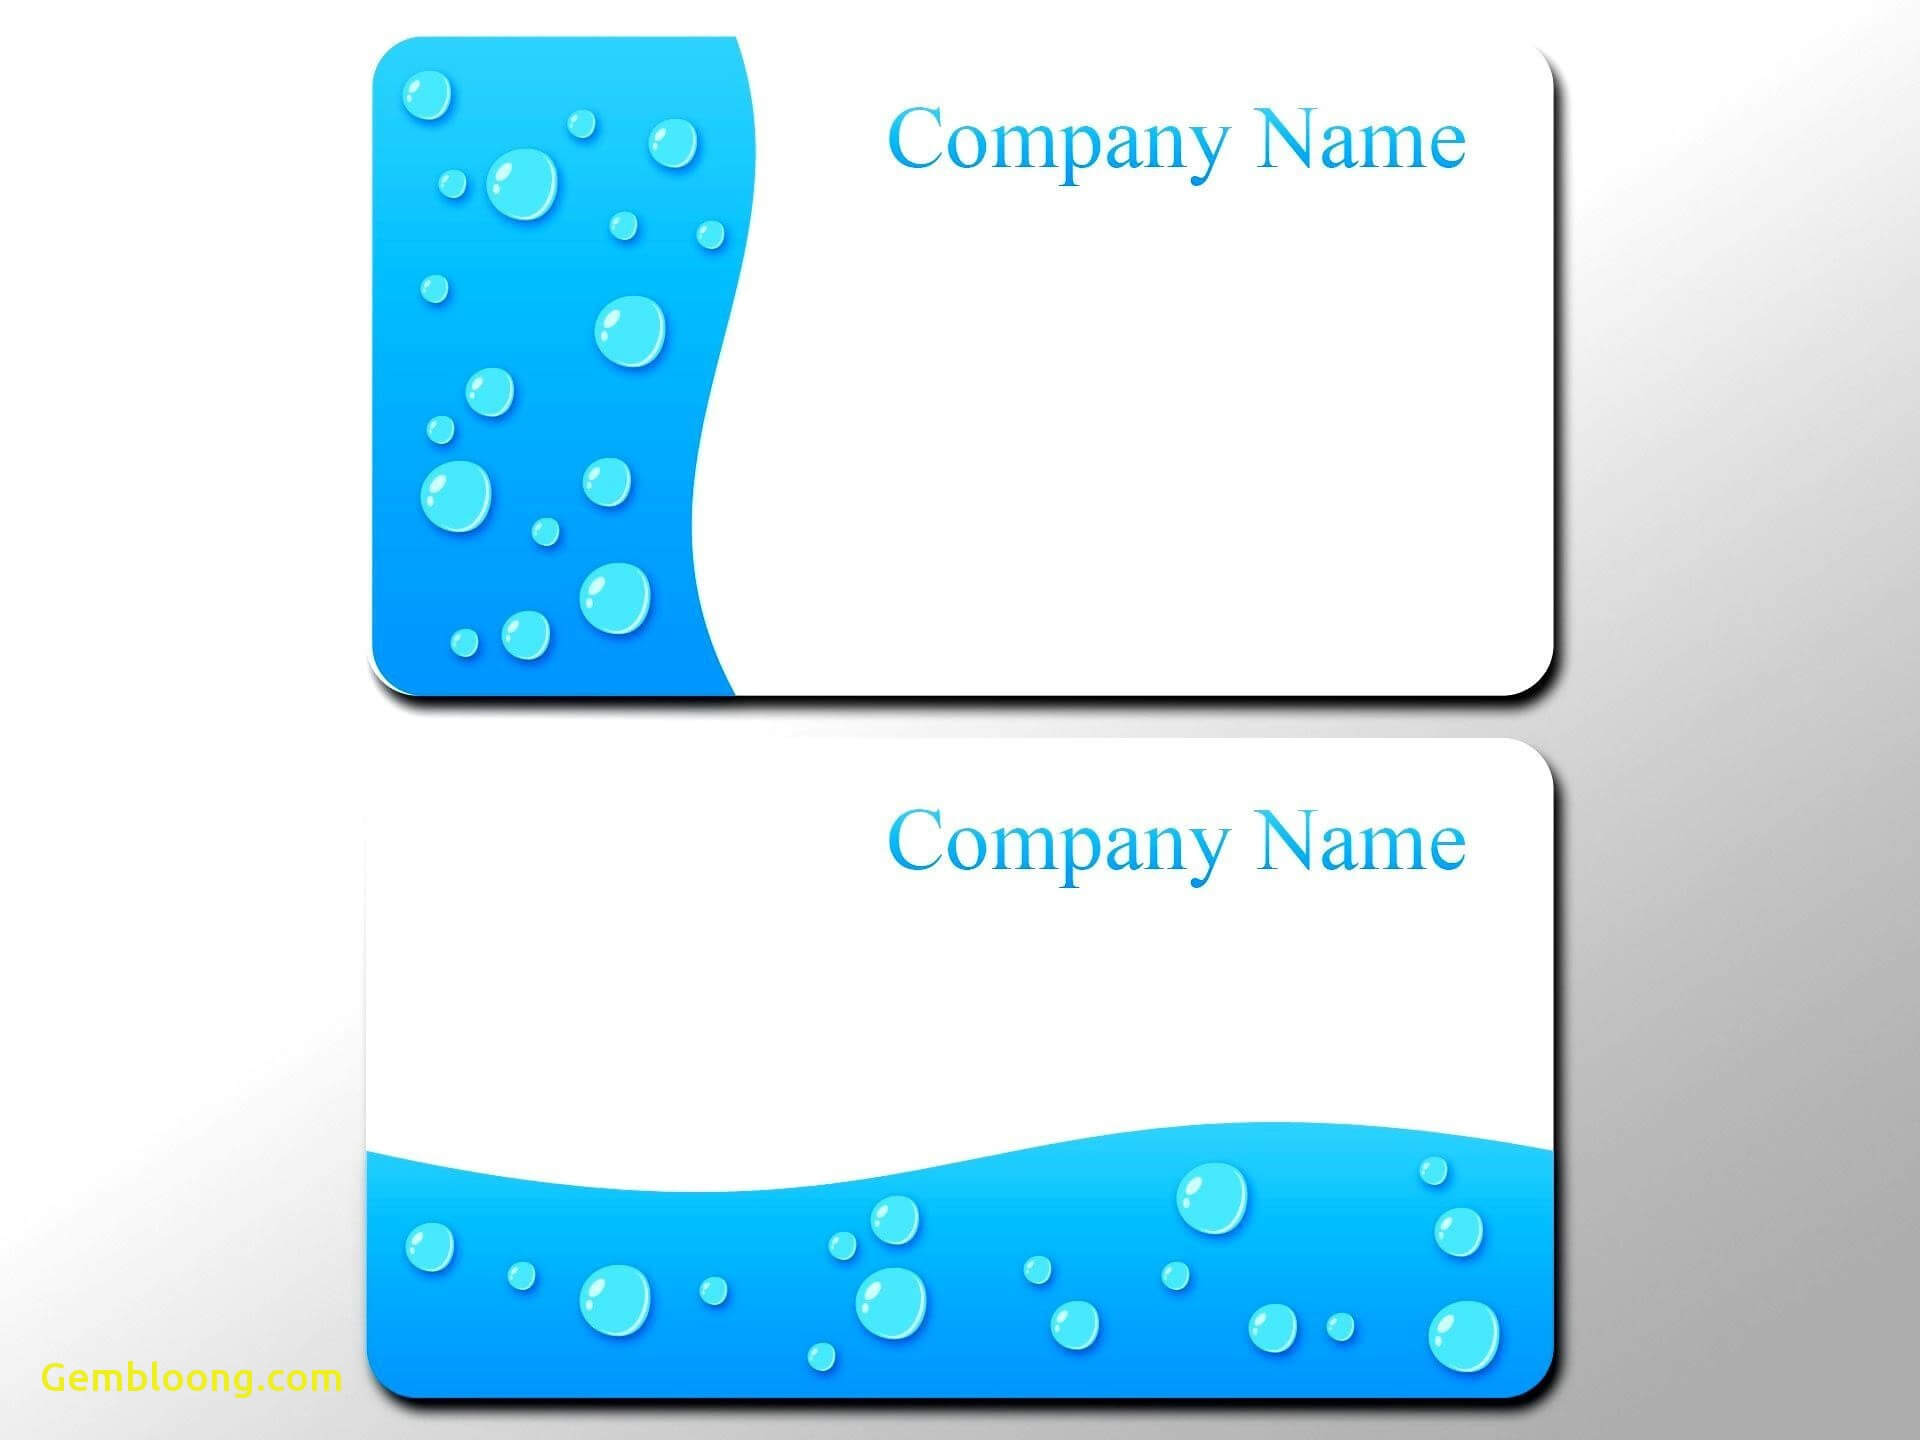 Business Card Photoshop Template Psd Awesome 016 Business With Blank Business Card Template Download